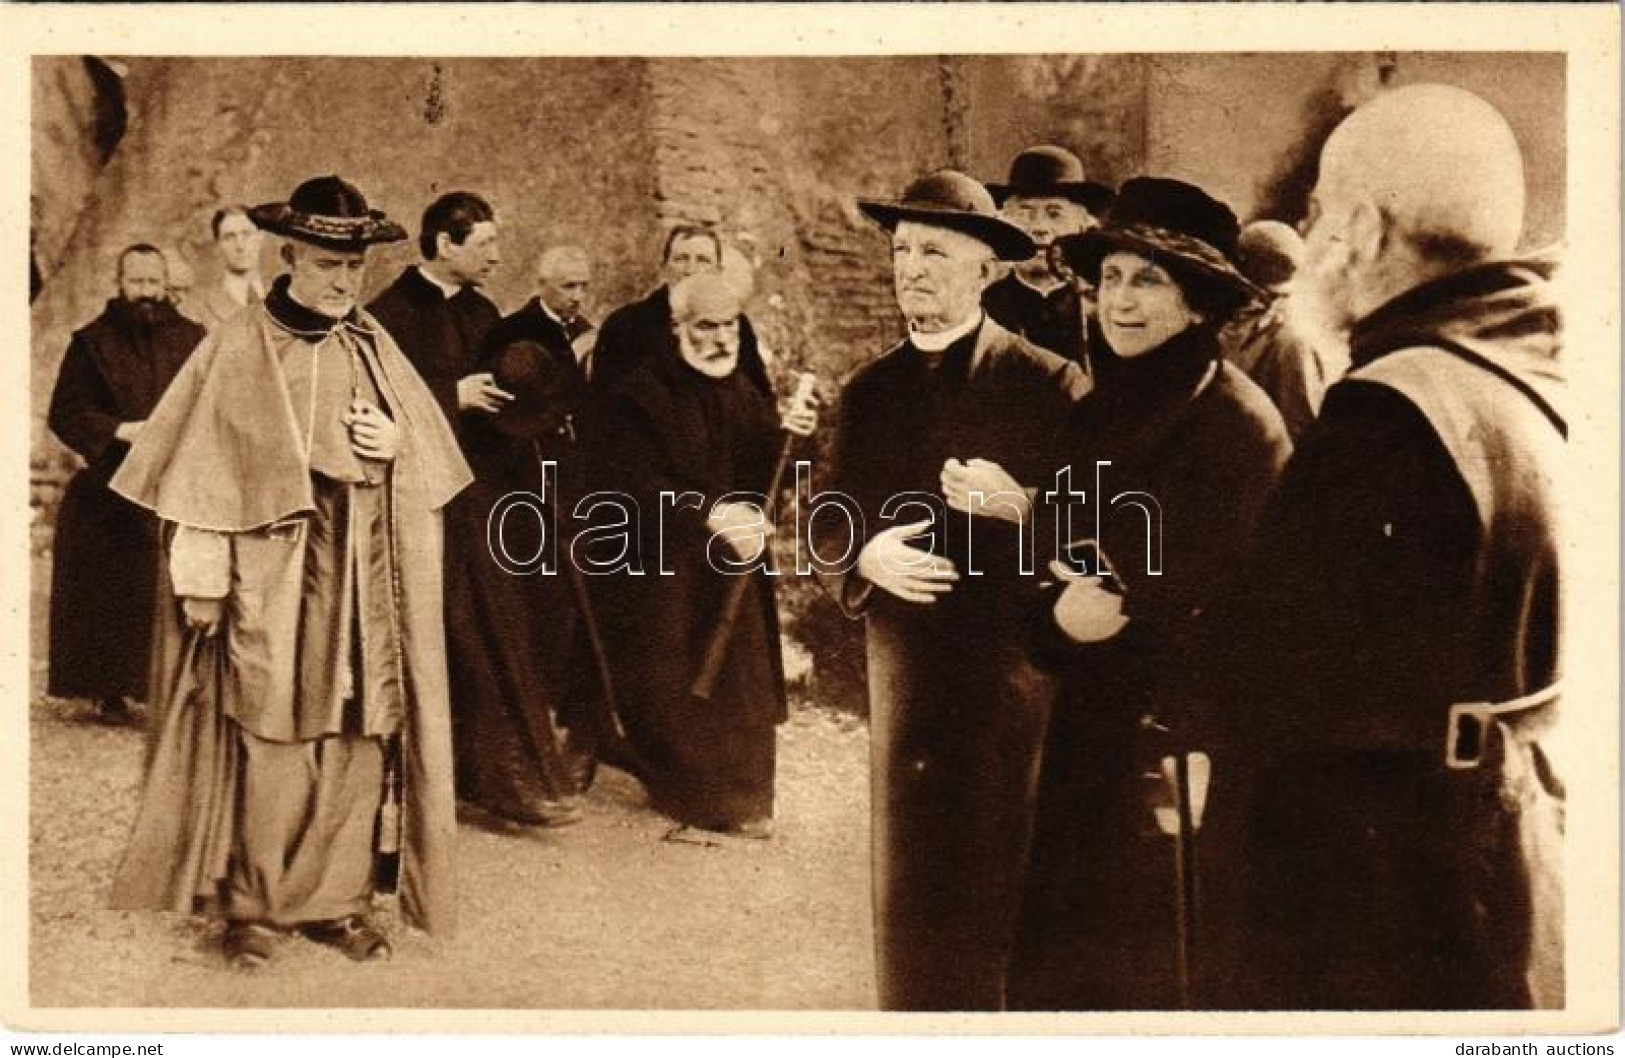 ** T2 His Emin. Card. Archbishop Hayes Of New York Entering The Catacombs Of St. Callistus To Celebrate Mass In The Cryp - Sin Clasificación